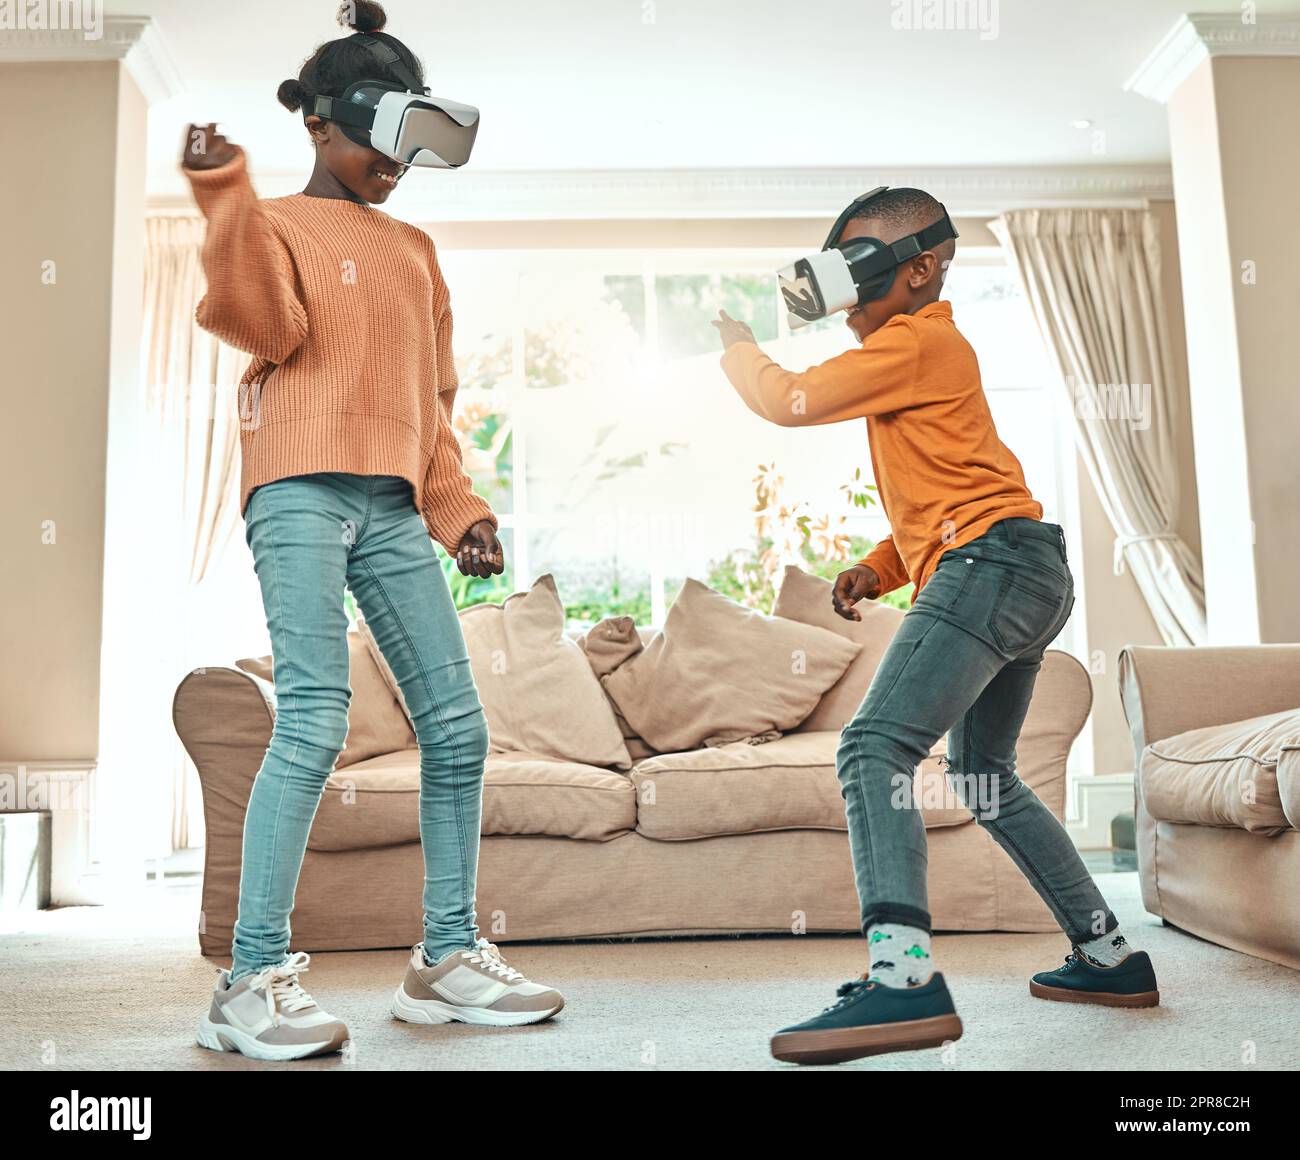 Theyre so entertained by technology. a brother and sister playing with each other while wearing VR headsets at home. Stock Photo